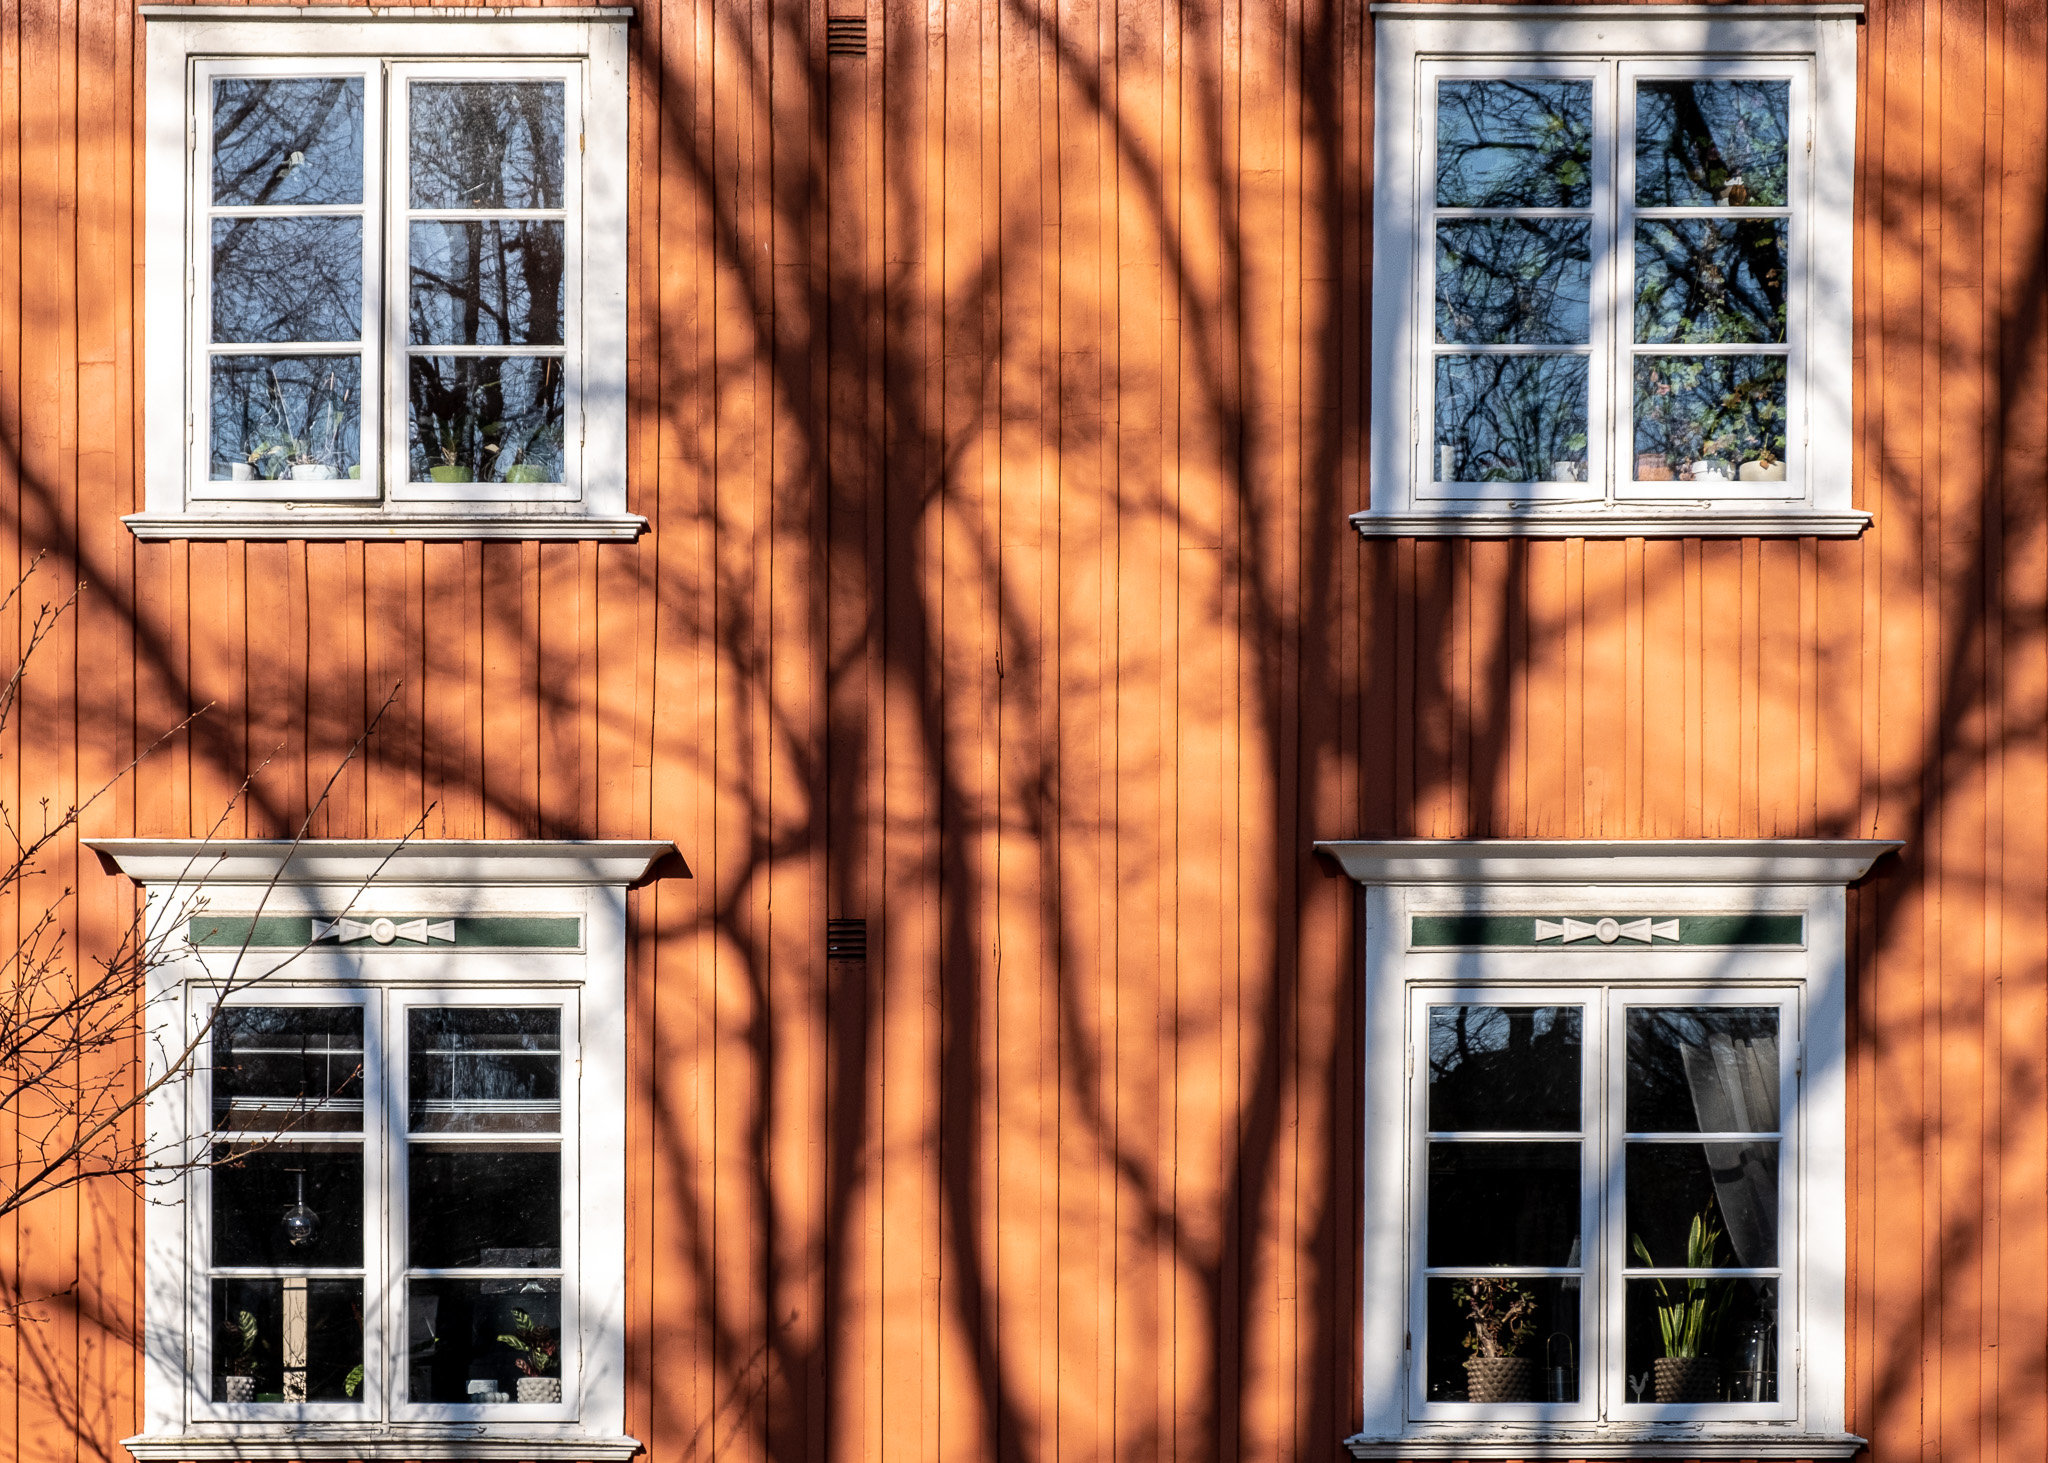 symetric windows with orange wooden wall